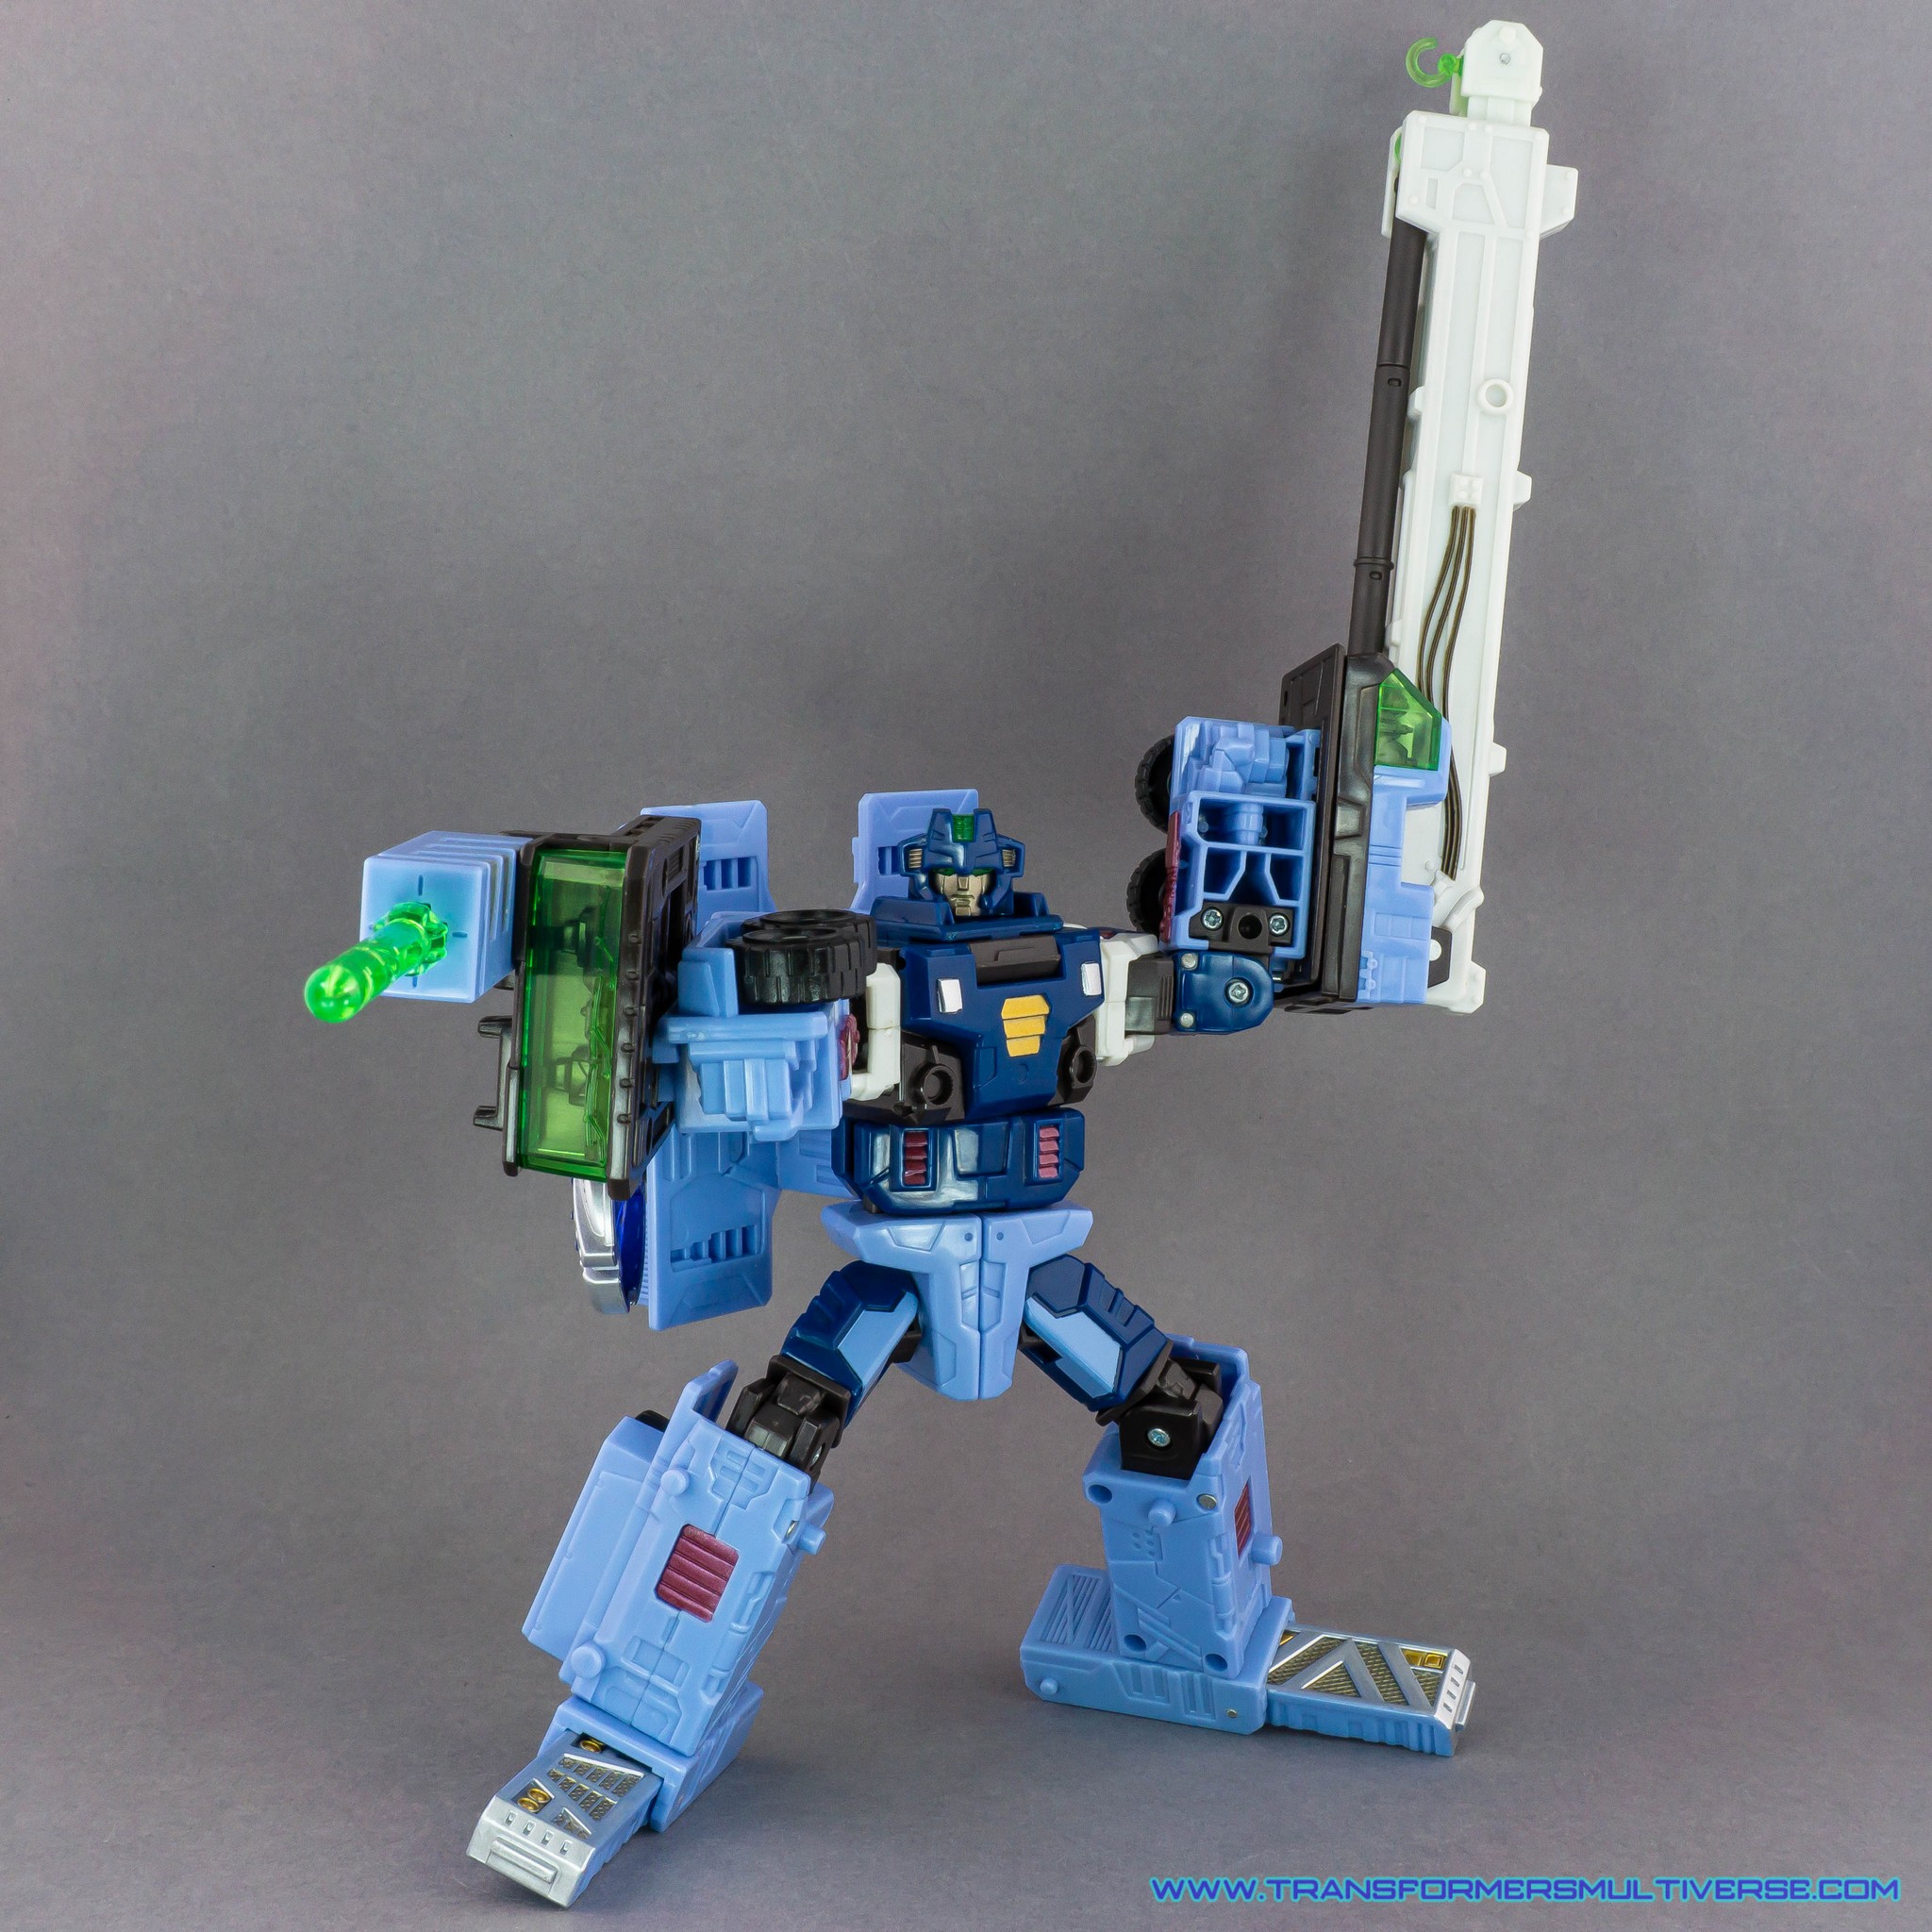 Transformers Cybertron Mudflap arm cannon deployed 1